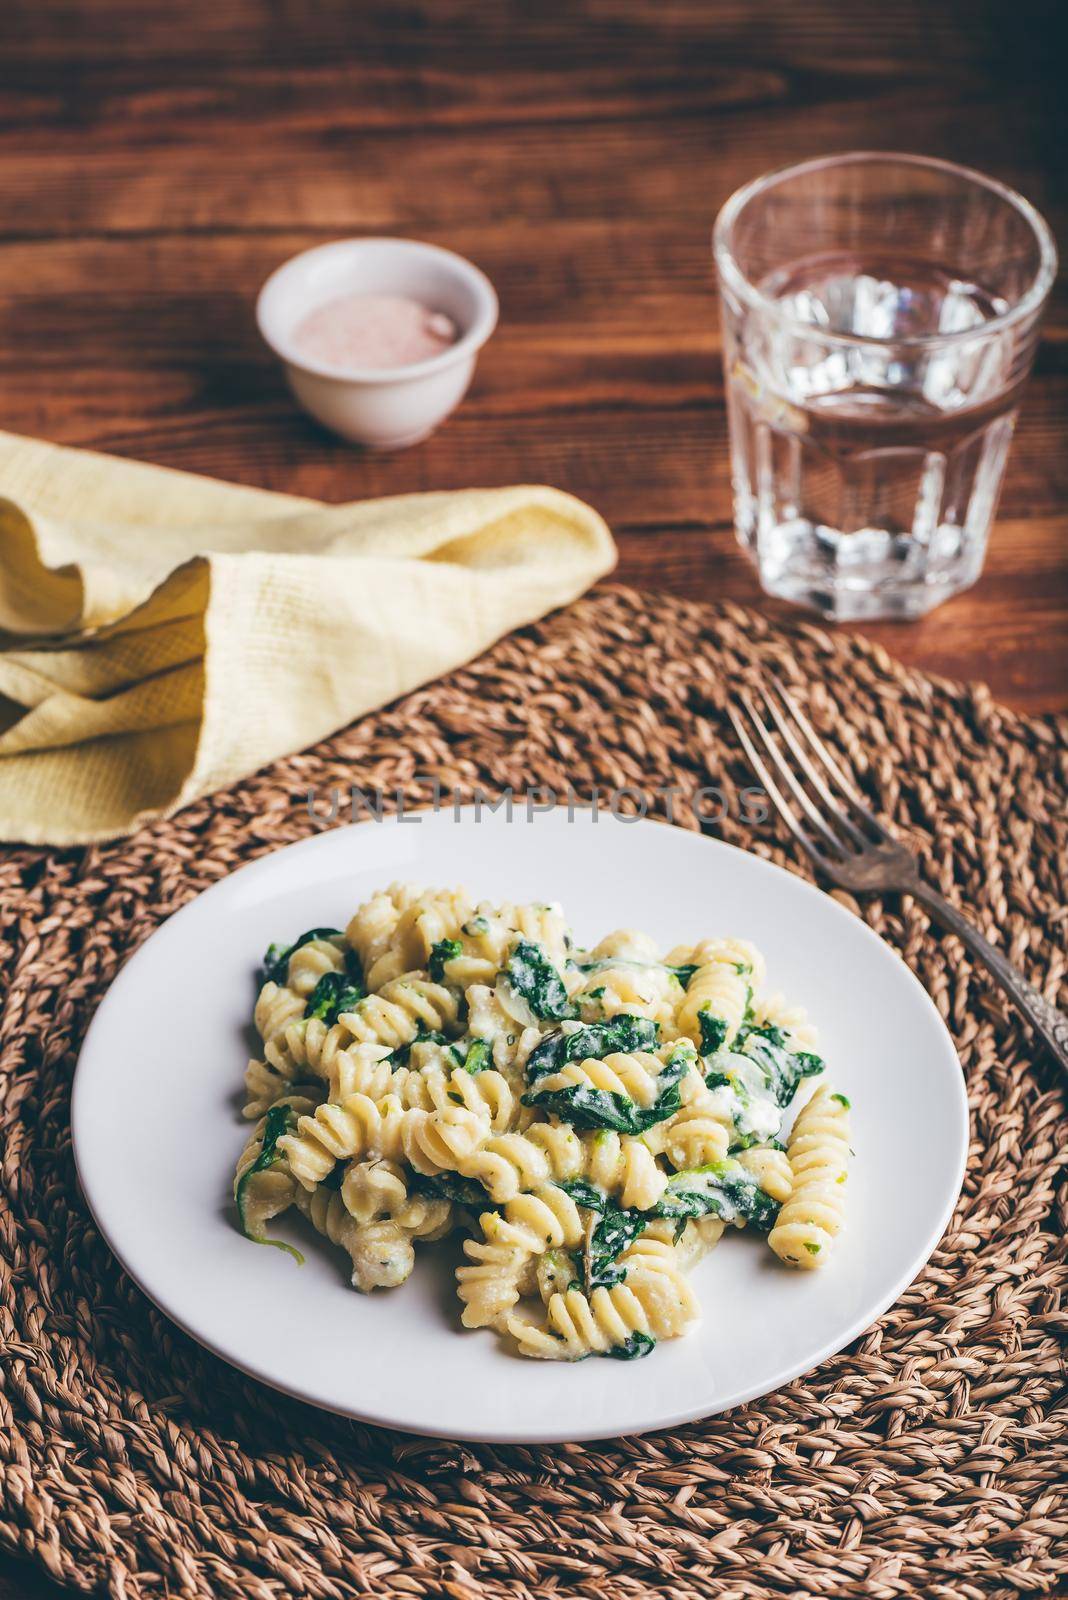 Creamy Pasta with Spinach by Seva_blsv